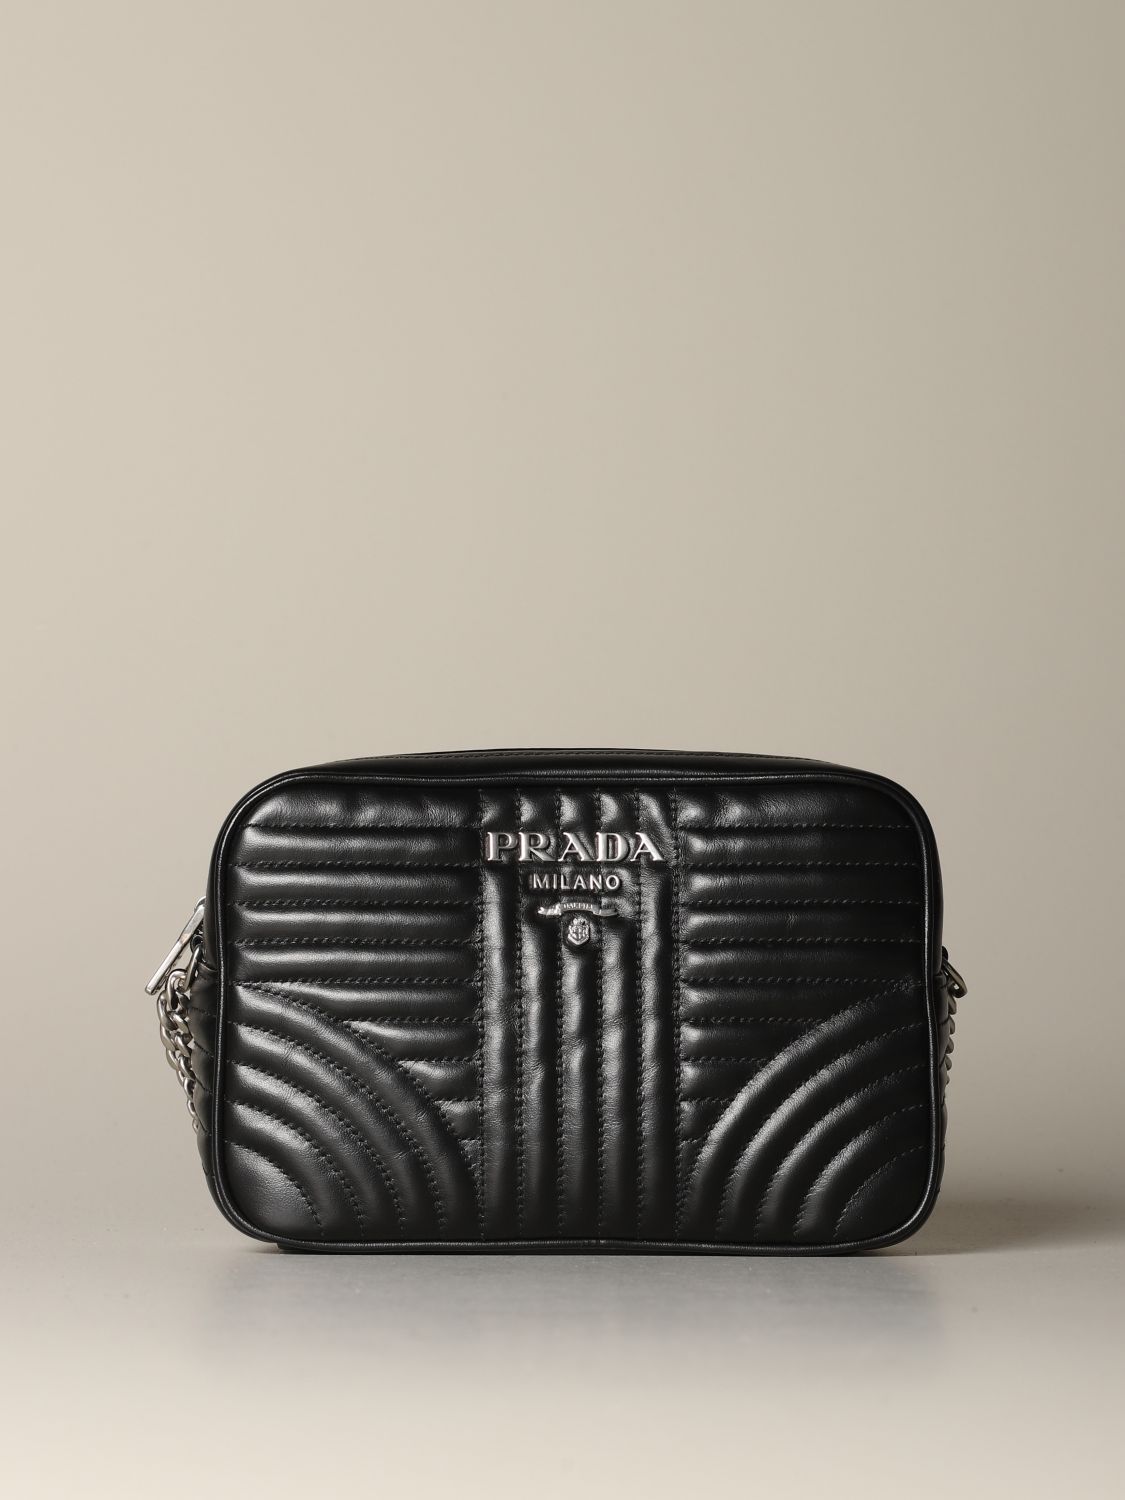 PRADA: Diagramme camera case bag in quilted leather - Black | Prada  crossbody bags 1BH083 2D91 online on 